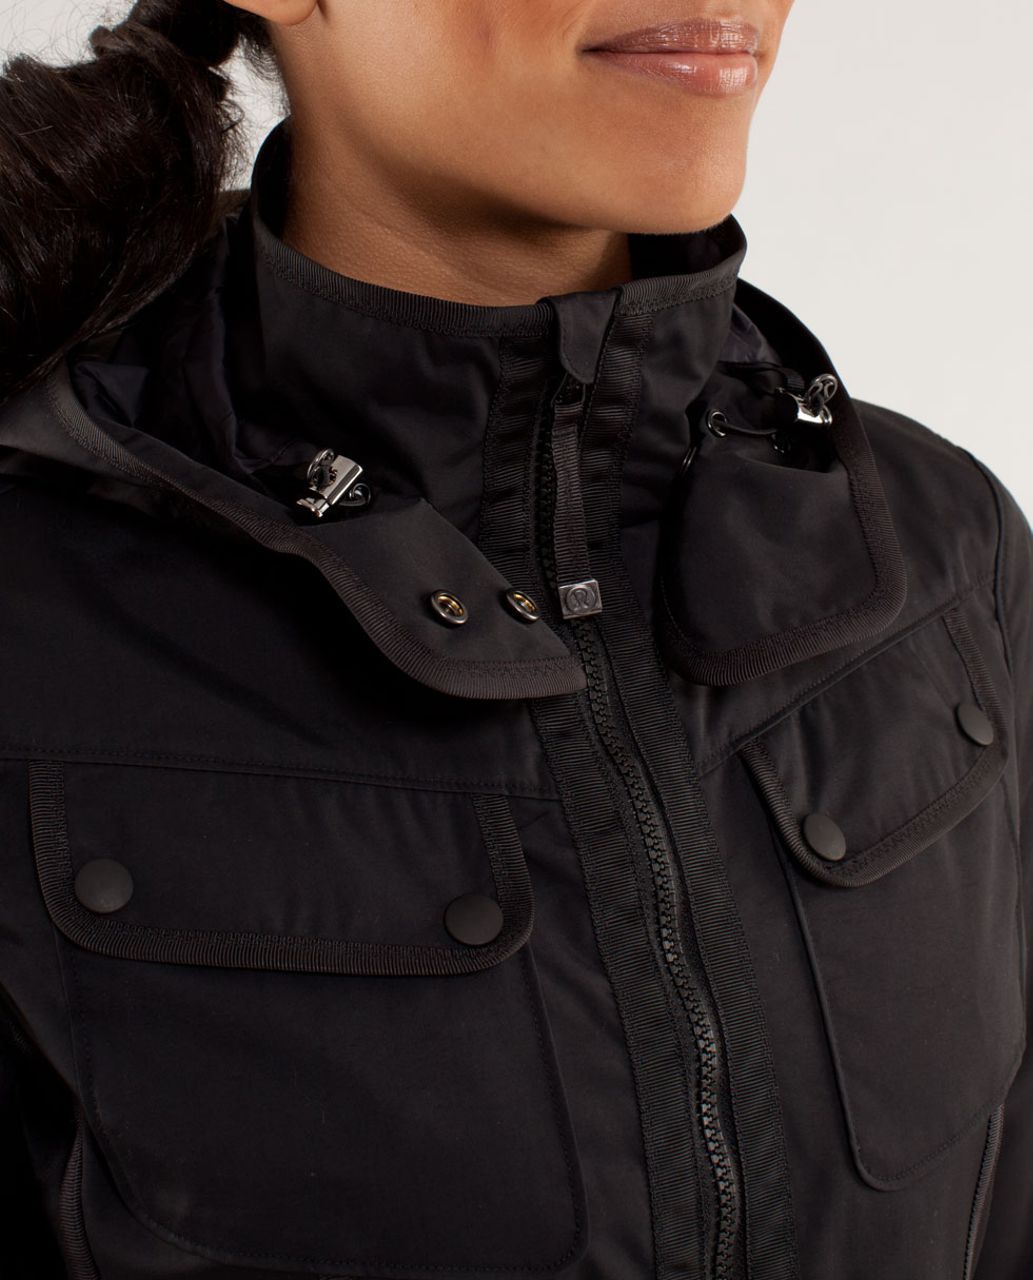 Lululemon Out And About Jacket - Black